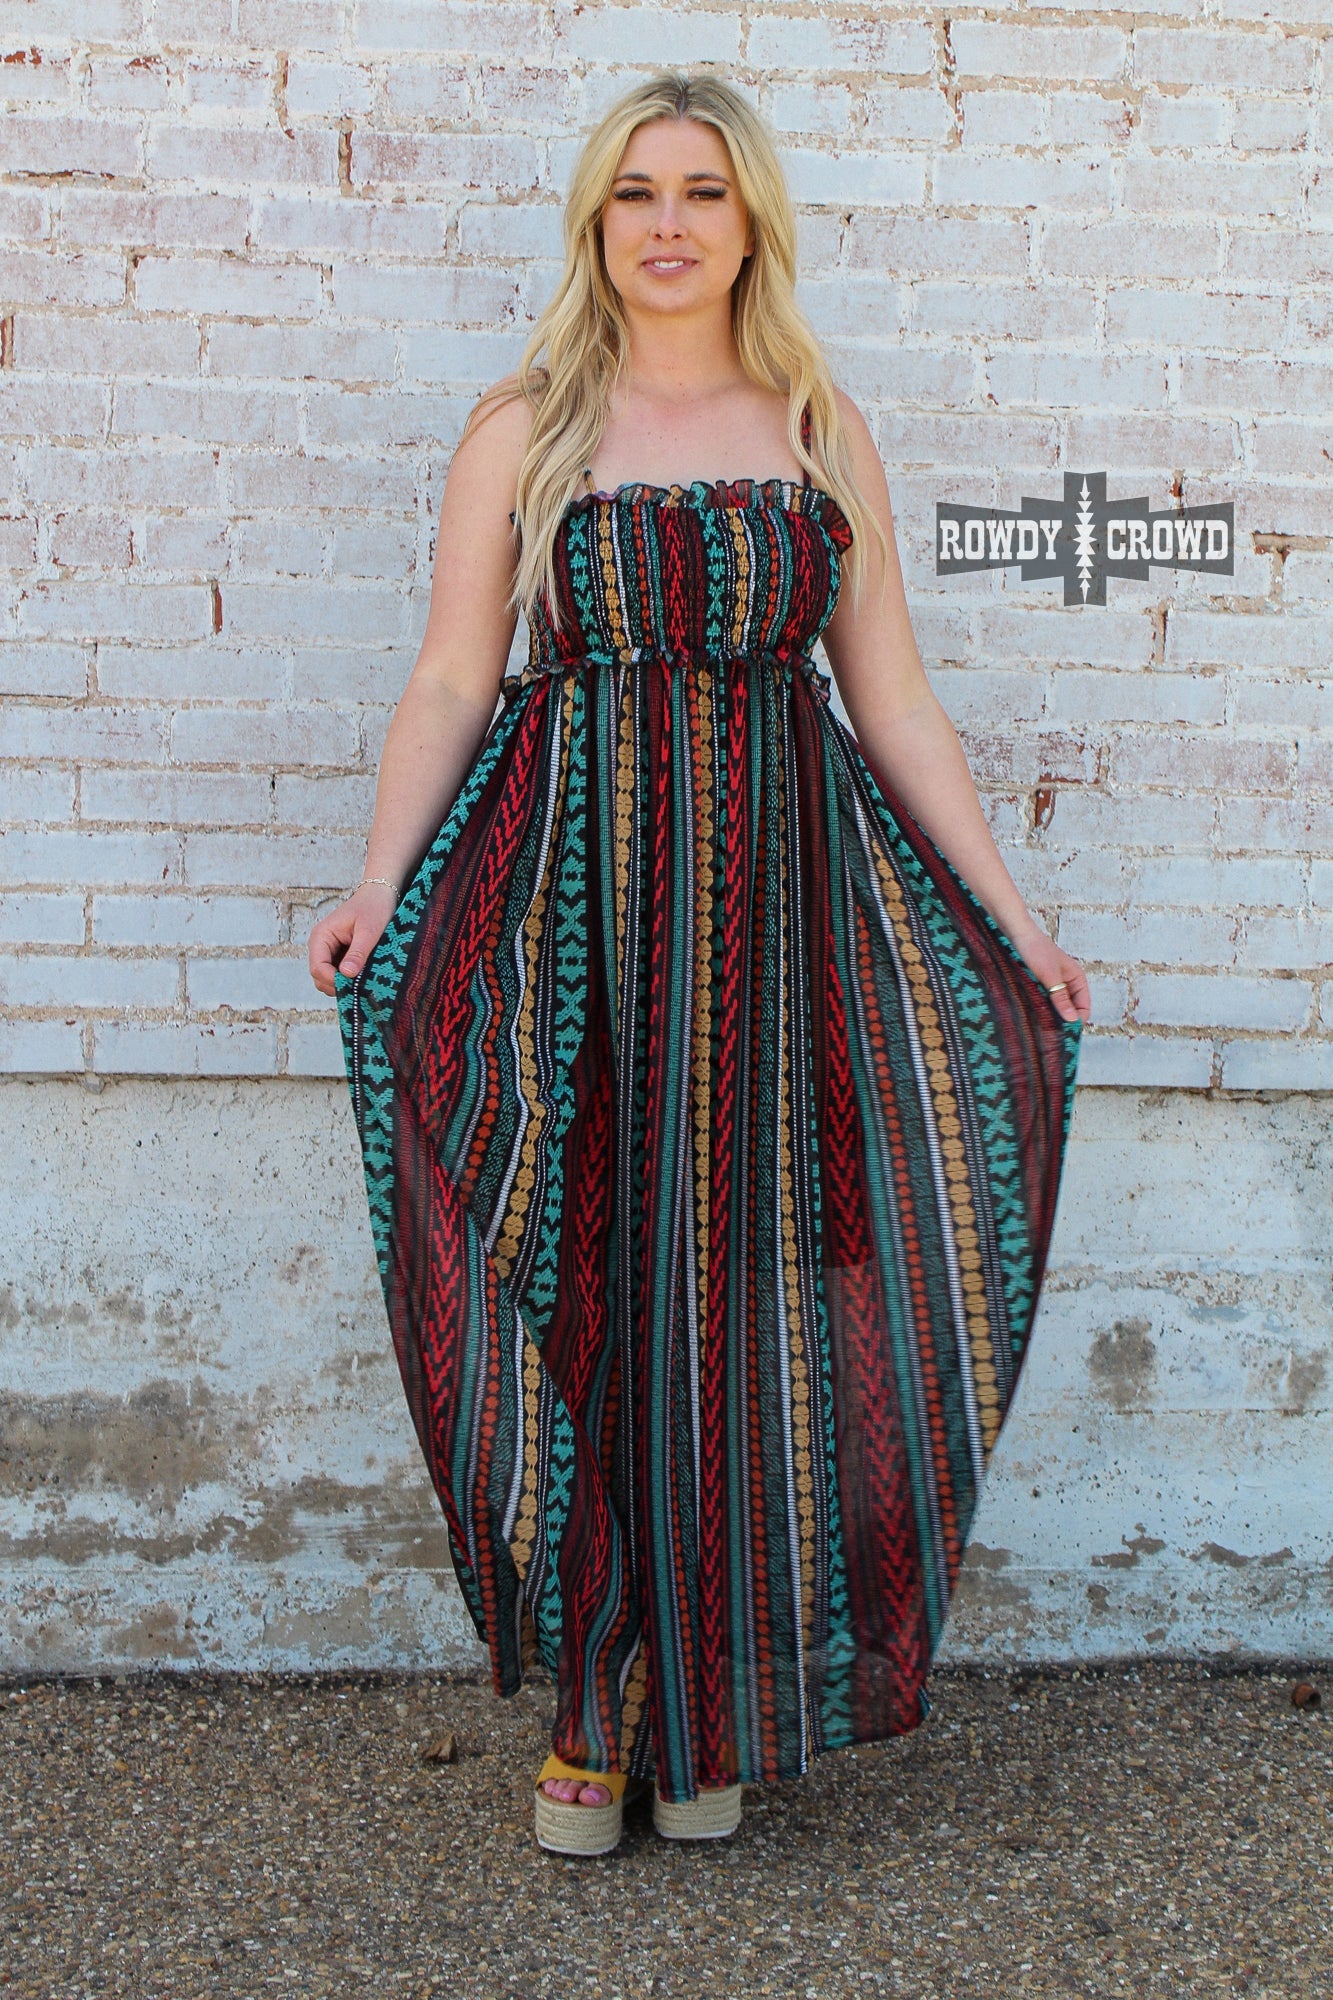 Western Dress, Western Apparel, Aztec Print Dress, Western Casual Dress, Western Wholesale, Western Boutique, Wholesale Clothing, cowgirl outfit, western dress, western dresses for women, aztec print dress, western attire, clothes western style, western aztec dress, wholesale clothing and accessories, women's western wholesale, women's wholesale